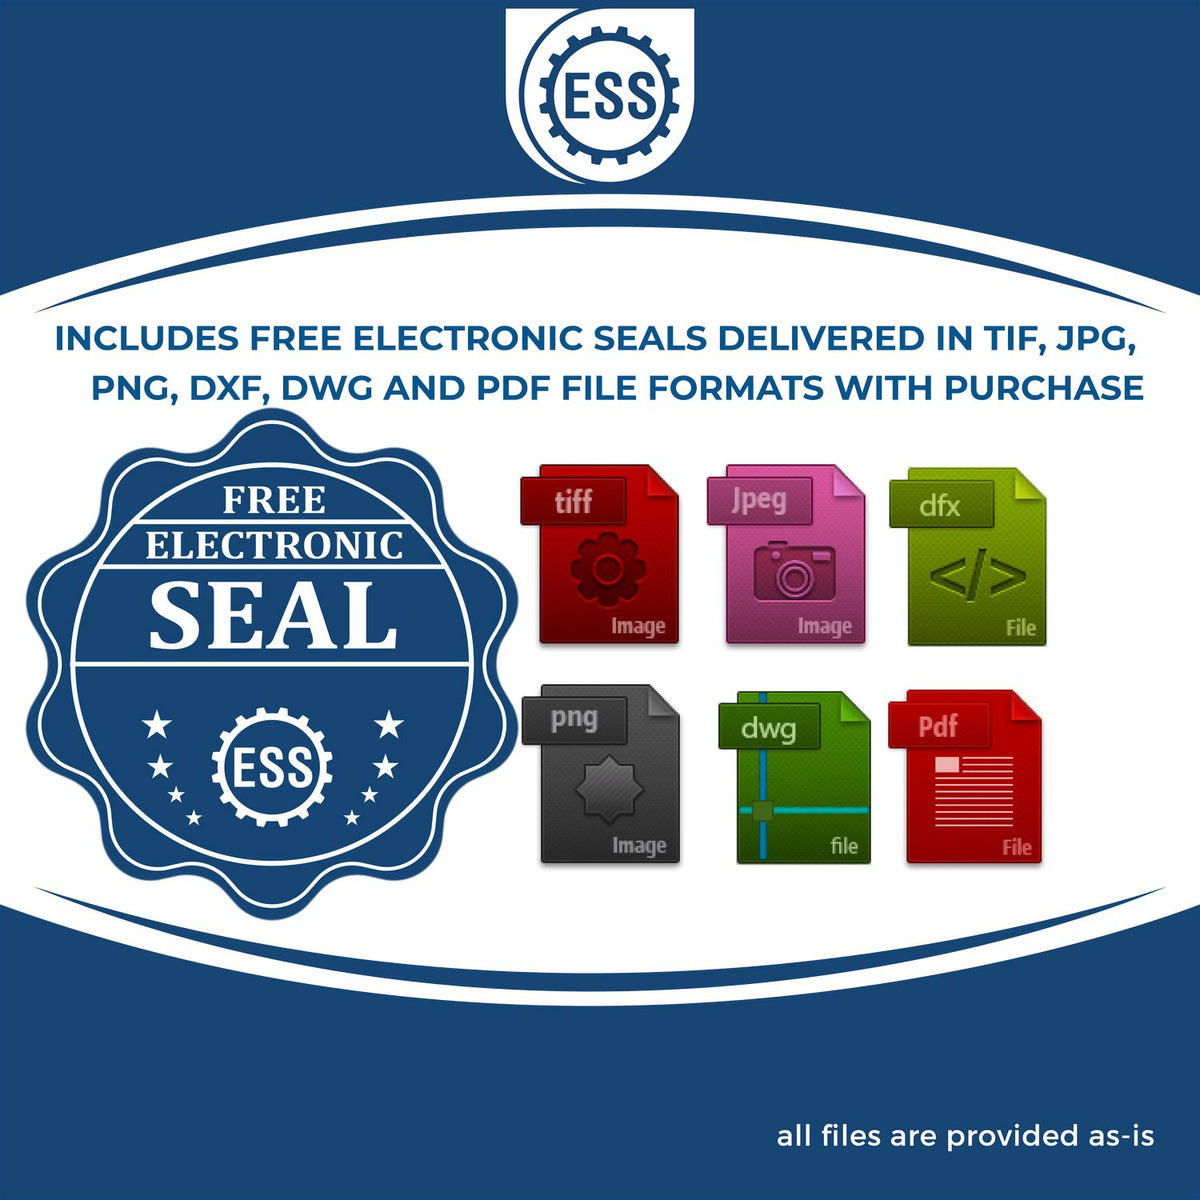 An infographic for the free electronic seal for the Premium MaxLight Pre-Inked Maine Geology Stamp illustrating the different file type icons such as DXF, DWG, TIF, JPG and PNG.